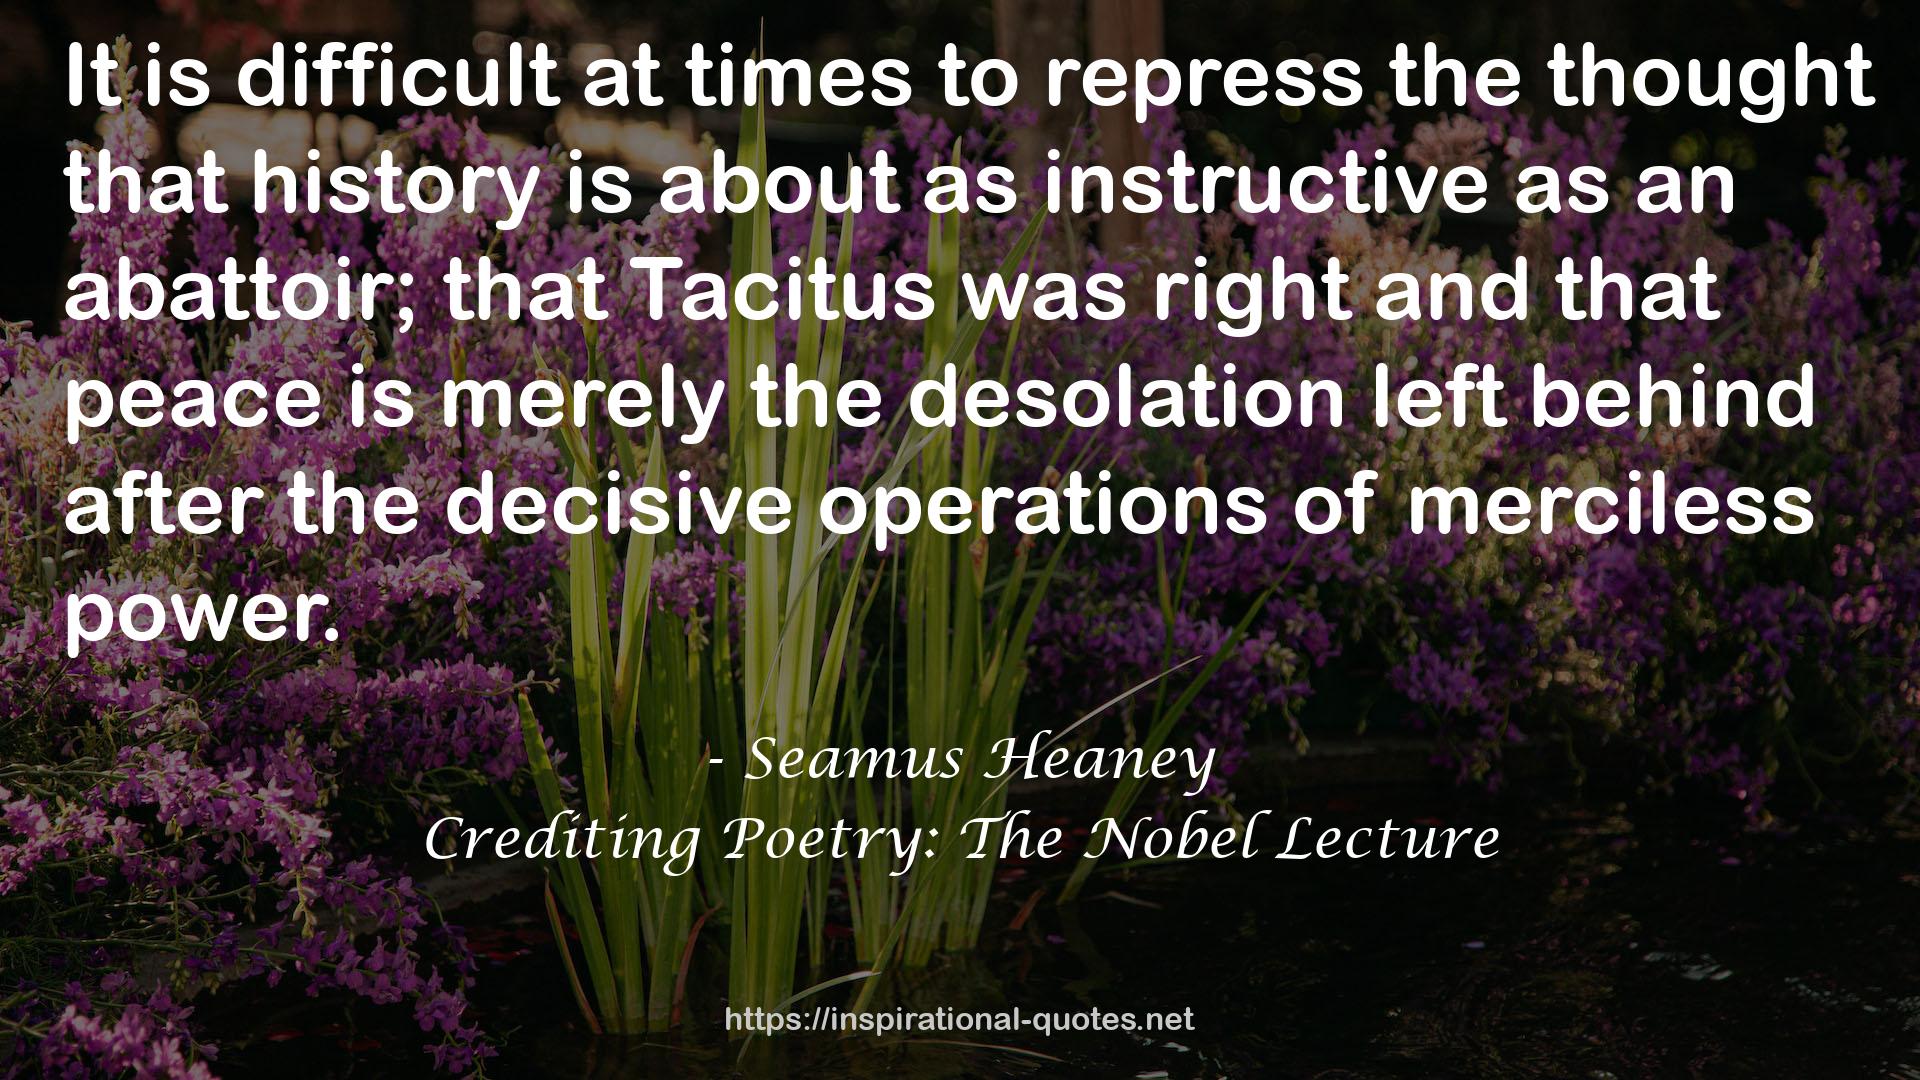 Crediting Poetry: The Nobel Lecture QUOTES